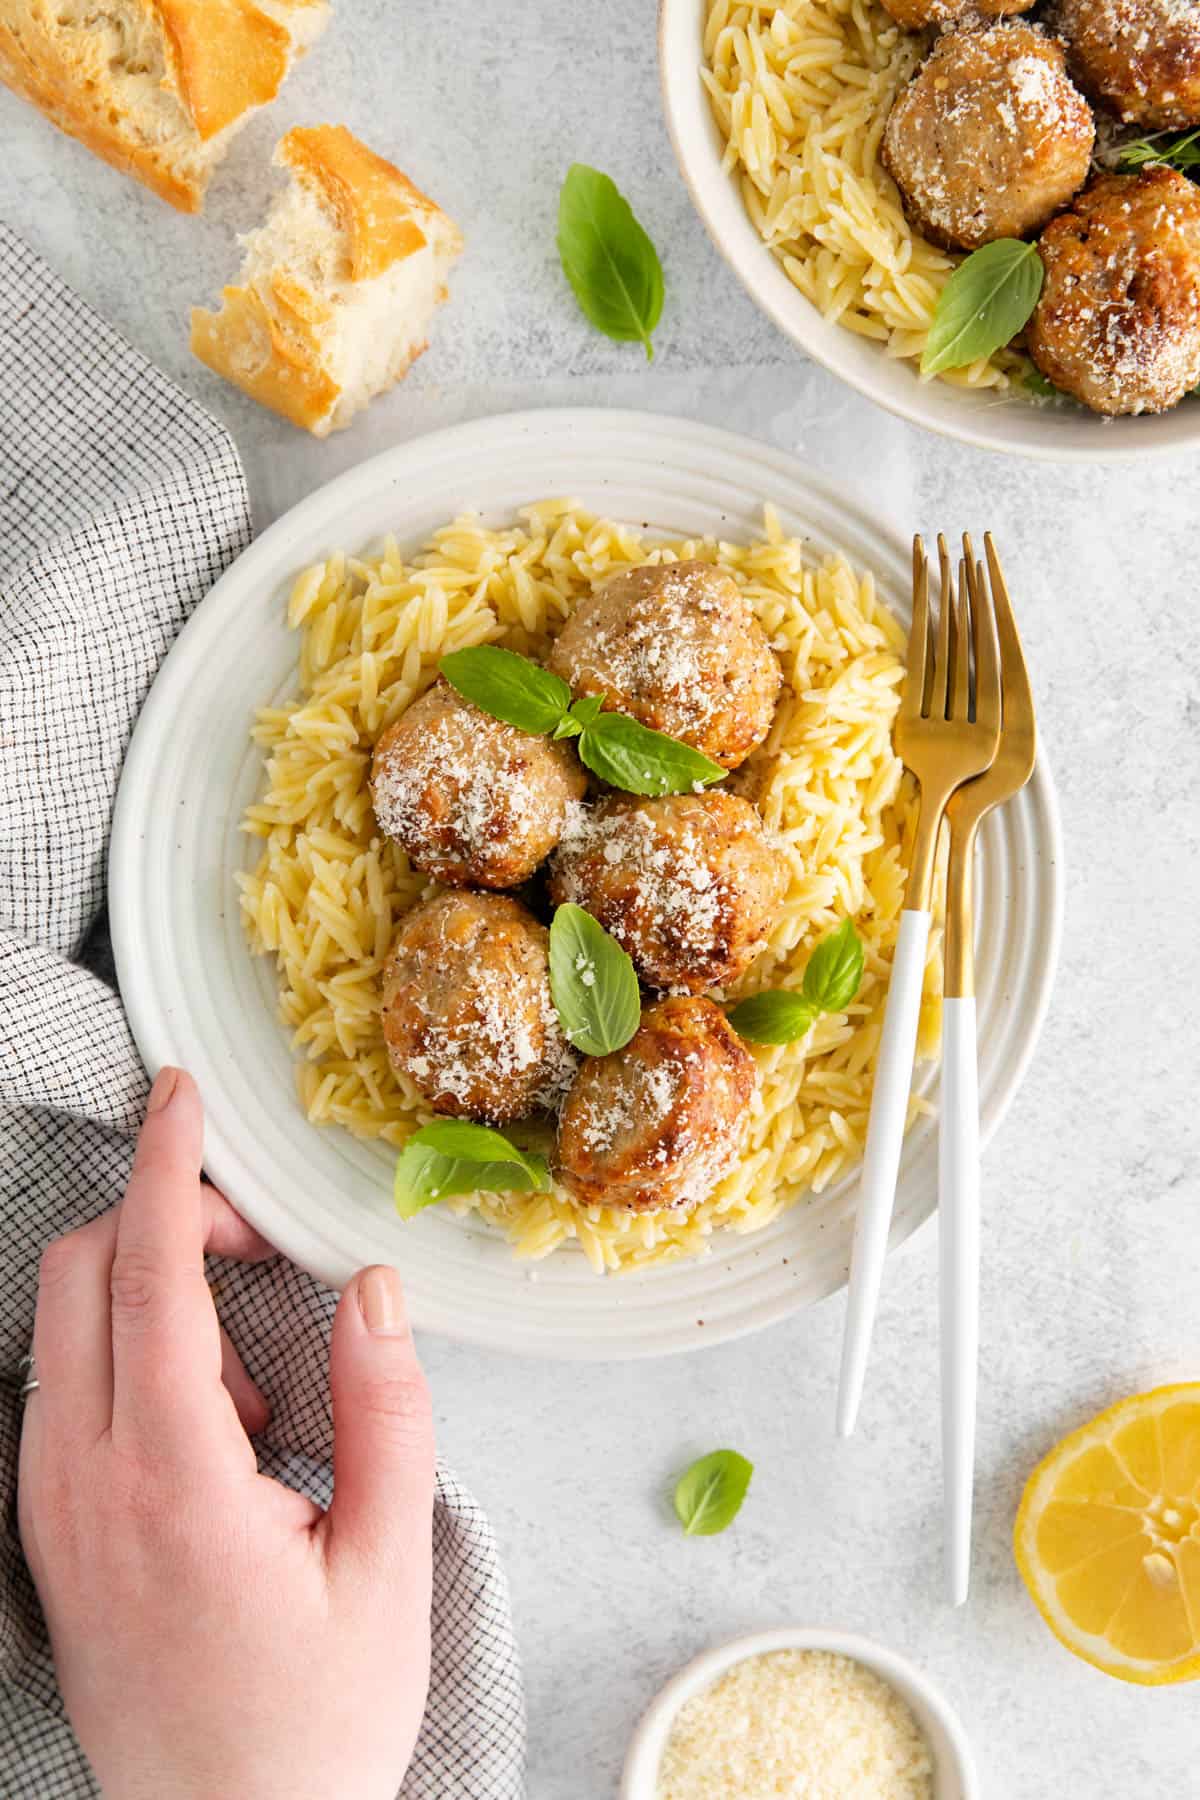 A hand reaching for a plate of lemon chicken meatballs.